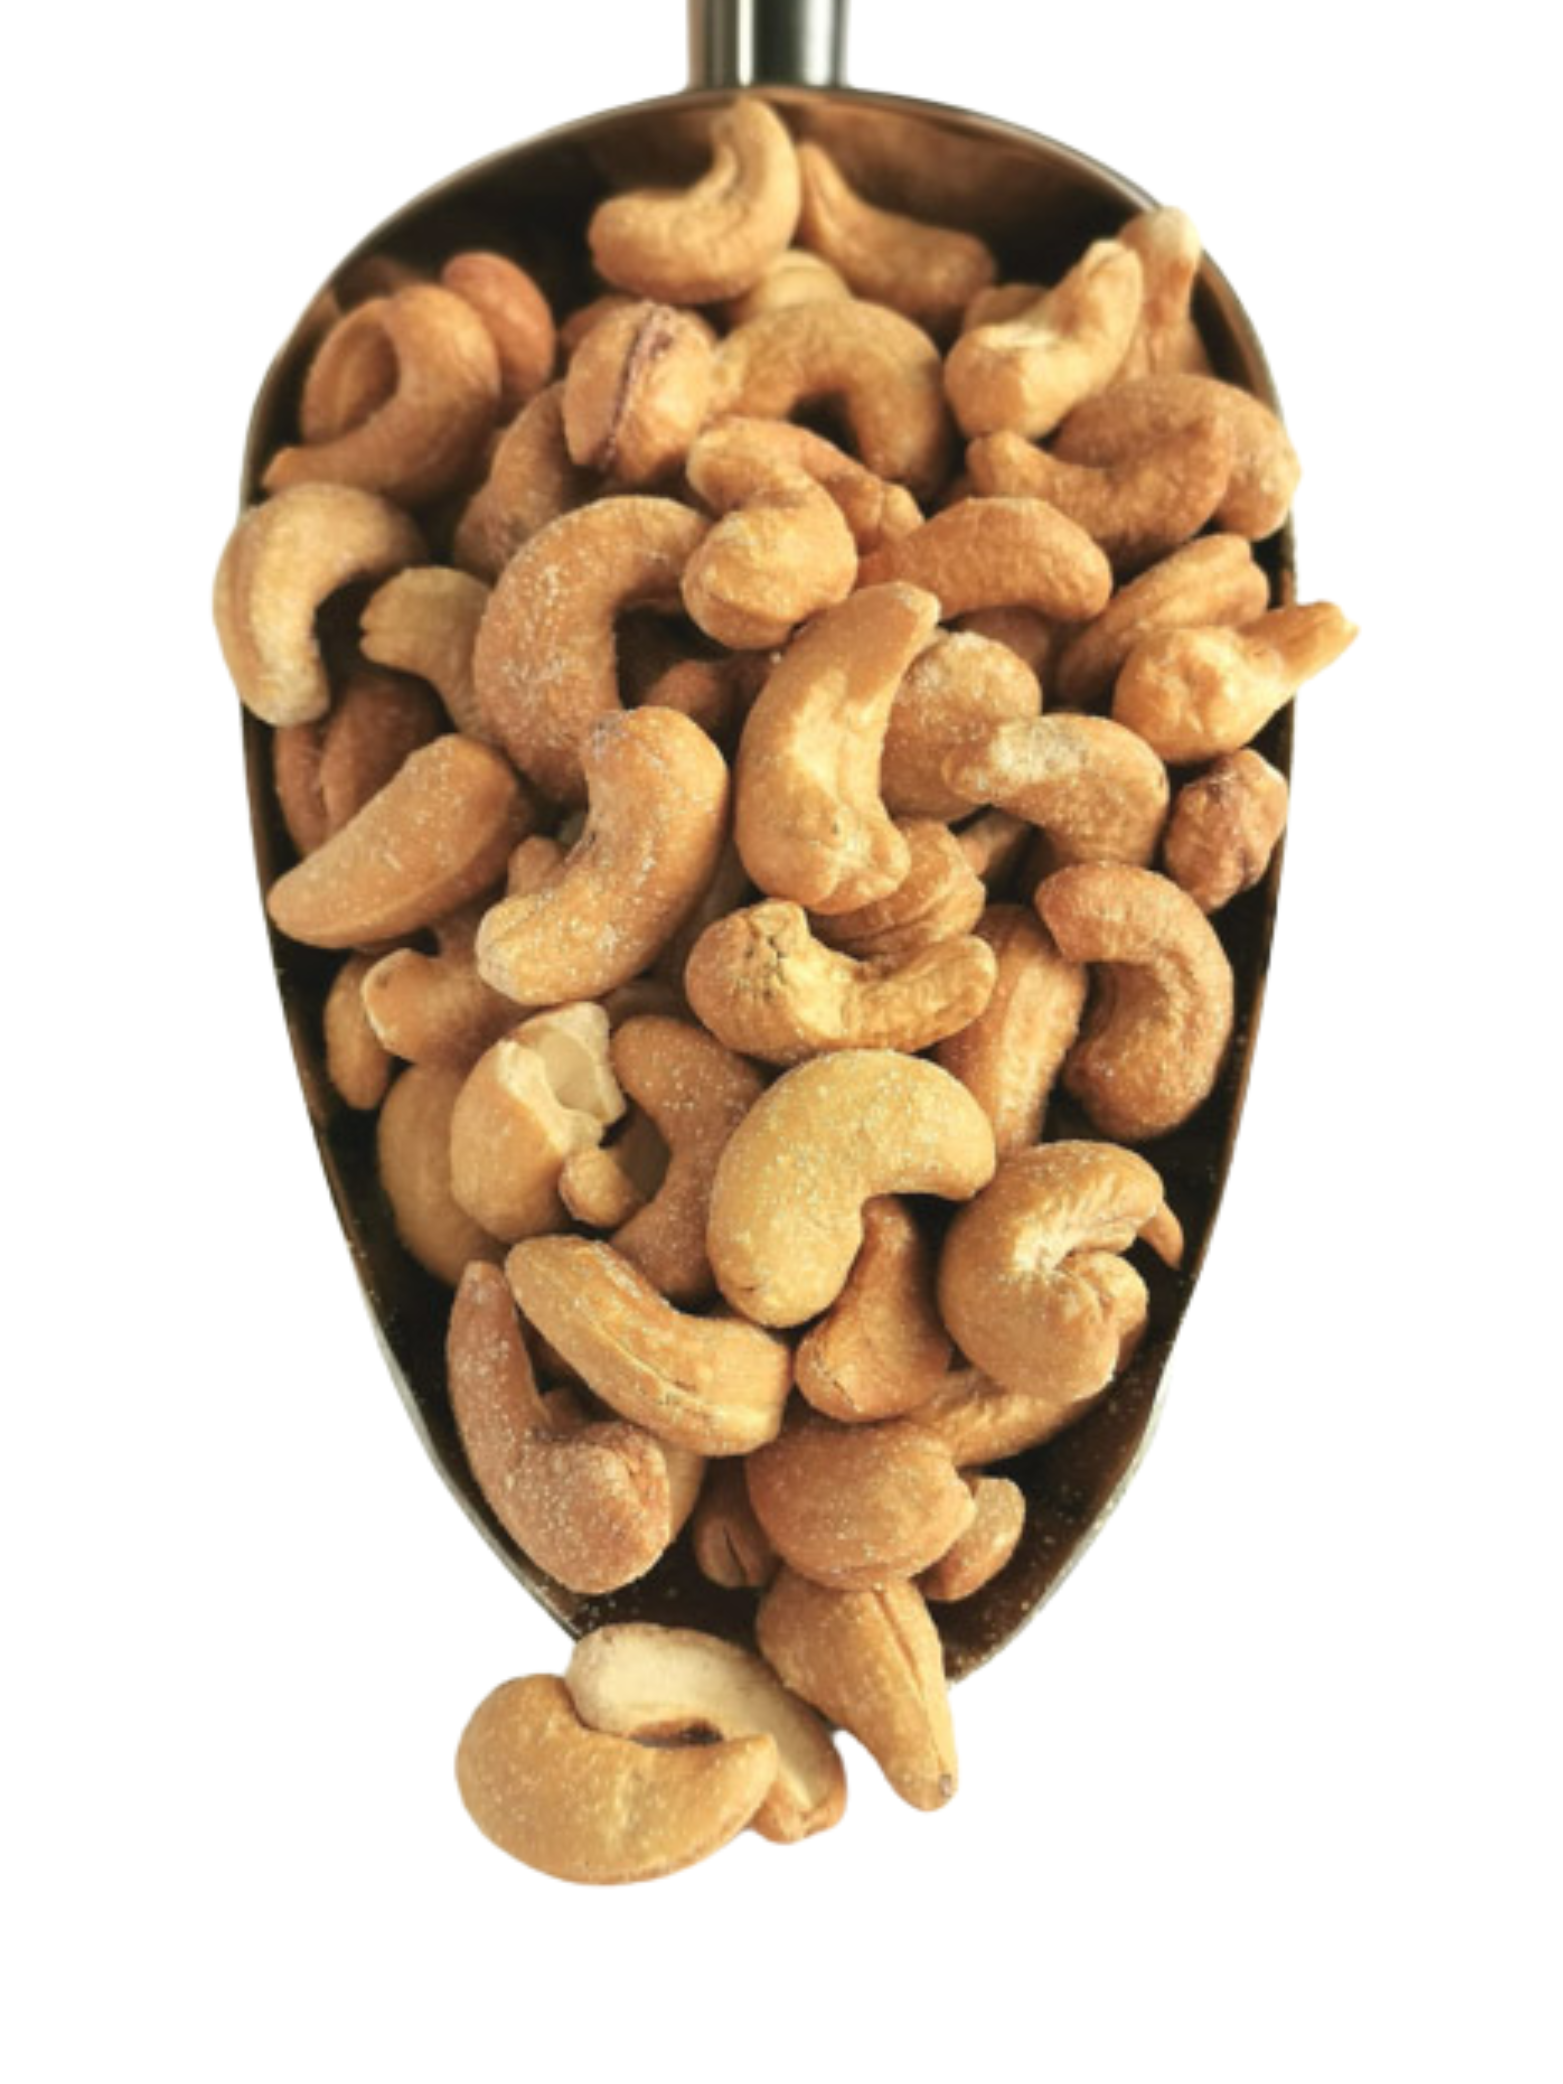 Cashew nuts - roasted / salted